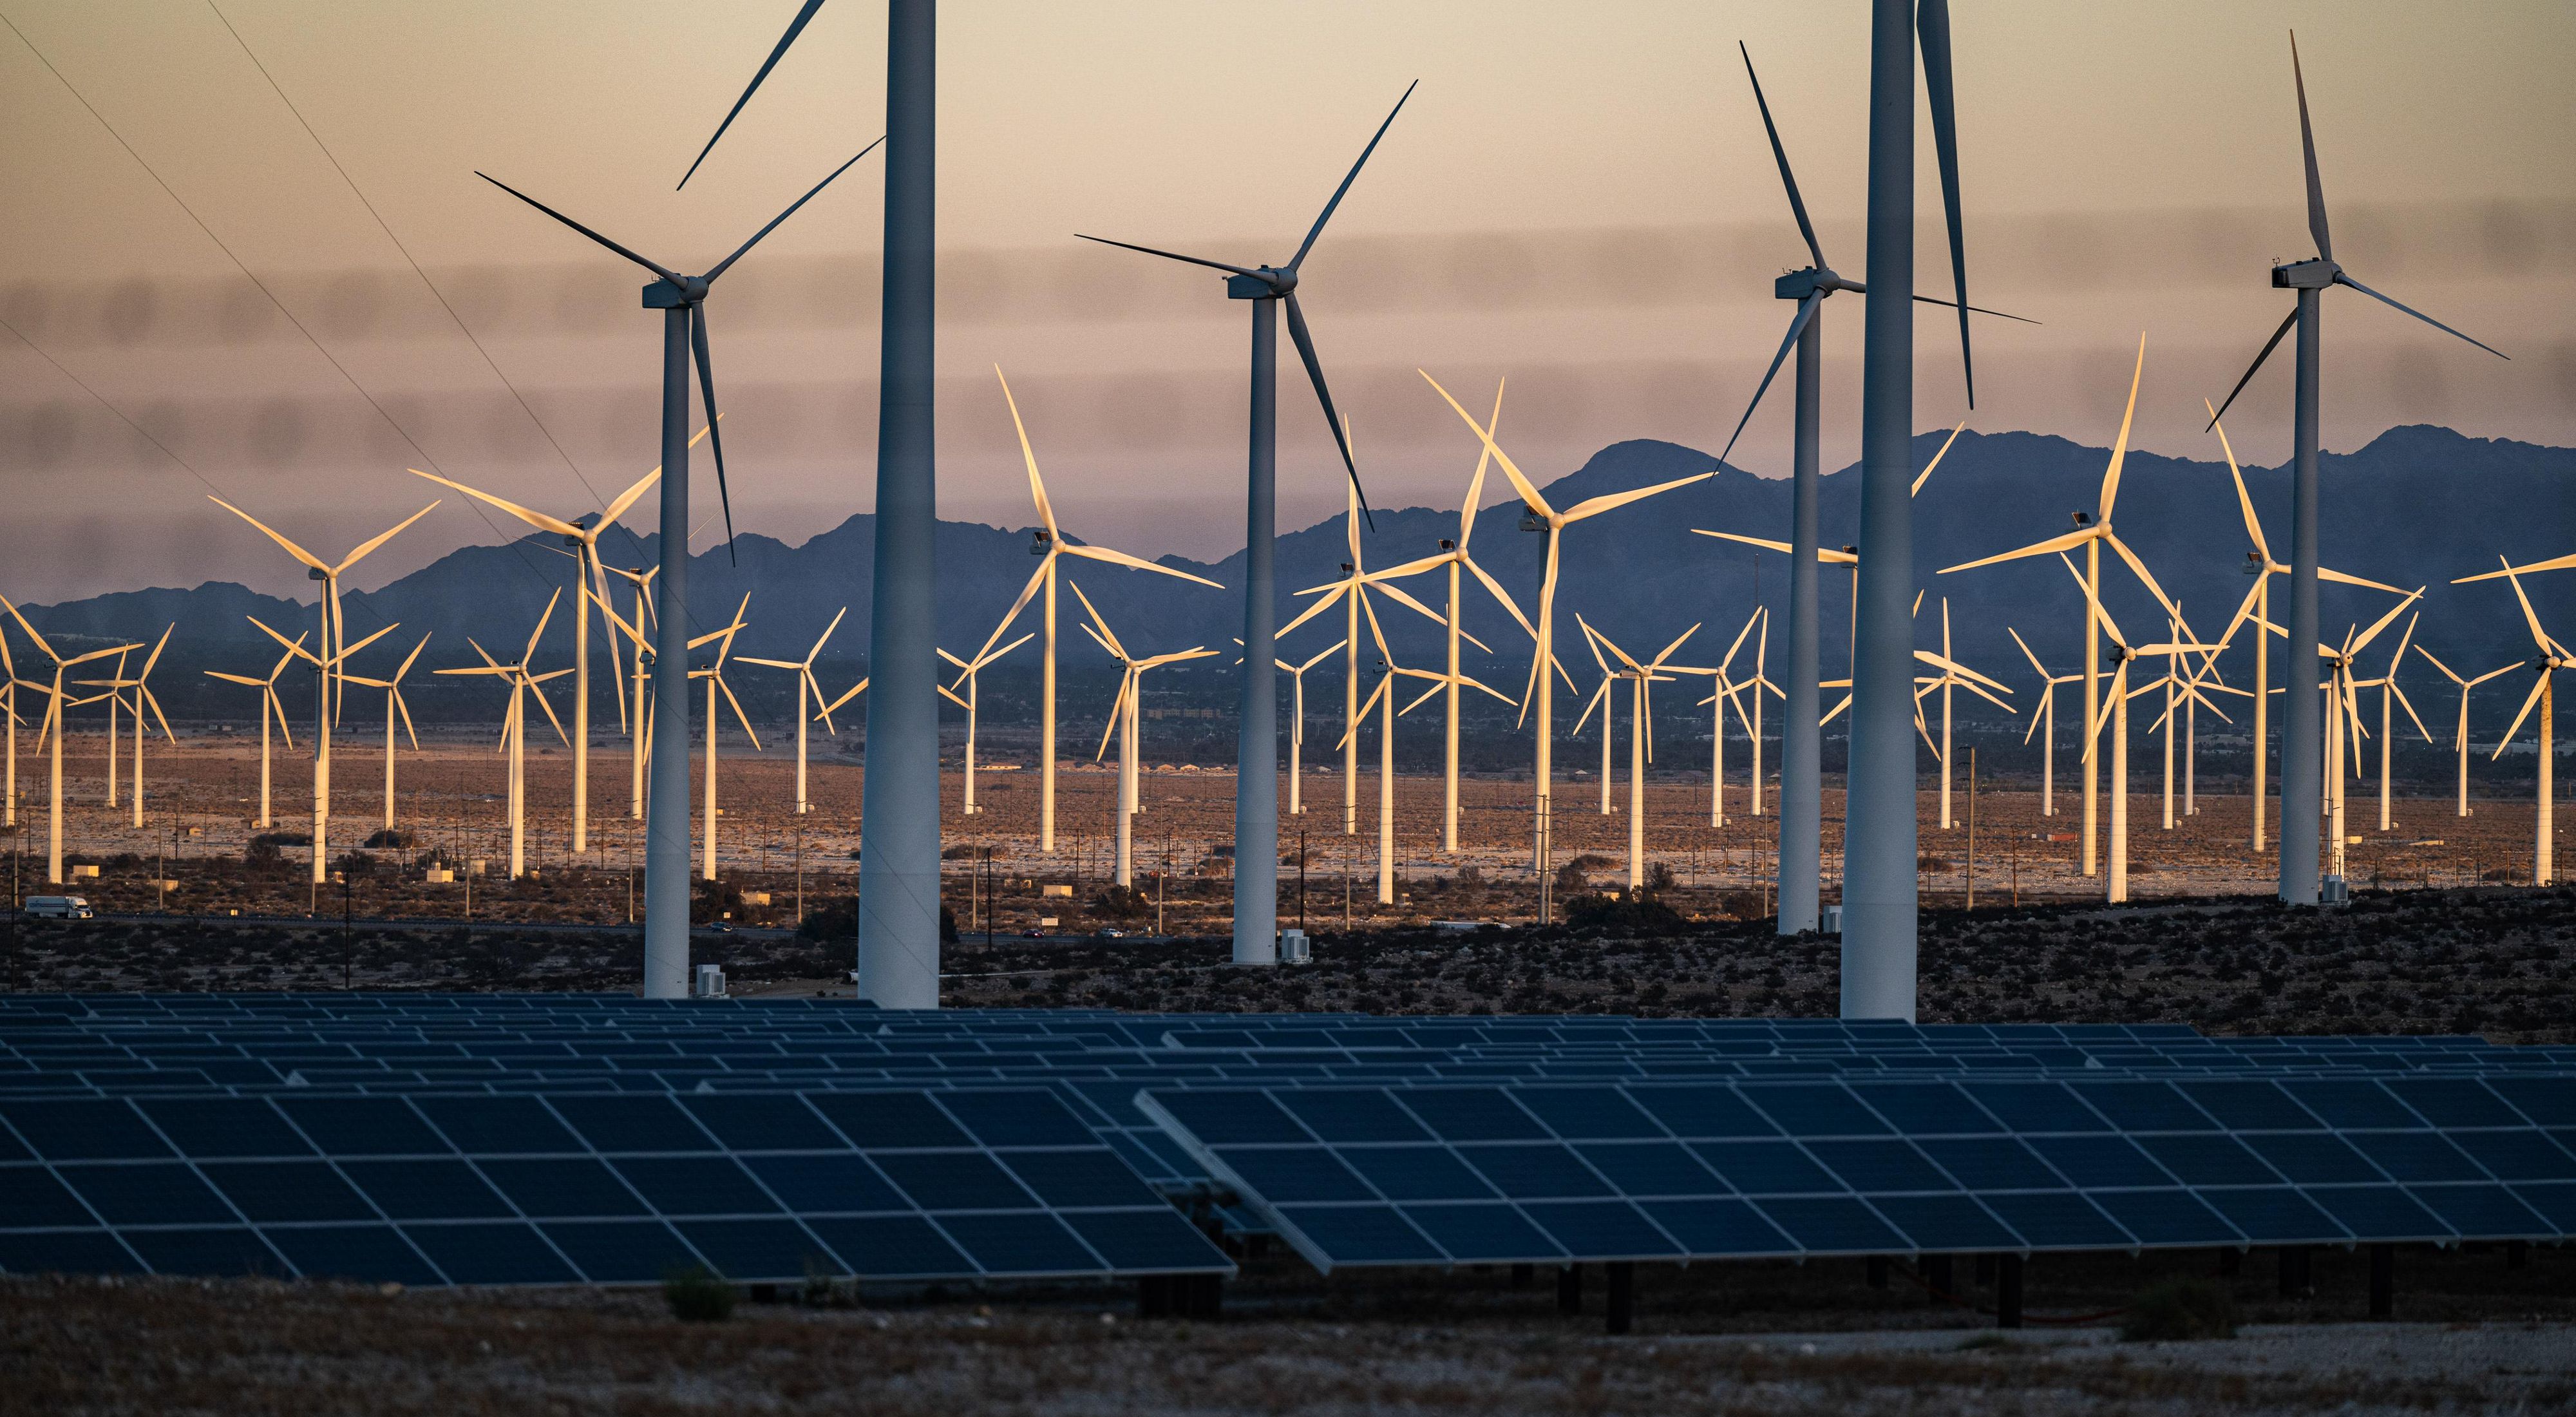 Photo during sunset of dozens of wind turbines towering over solar panels in the U.S. desert.